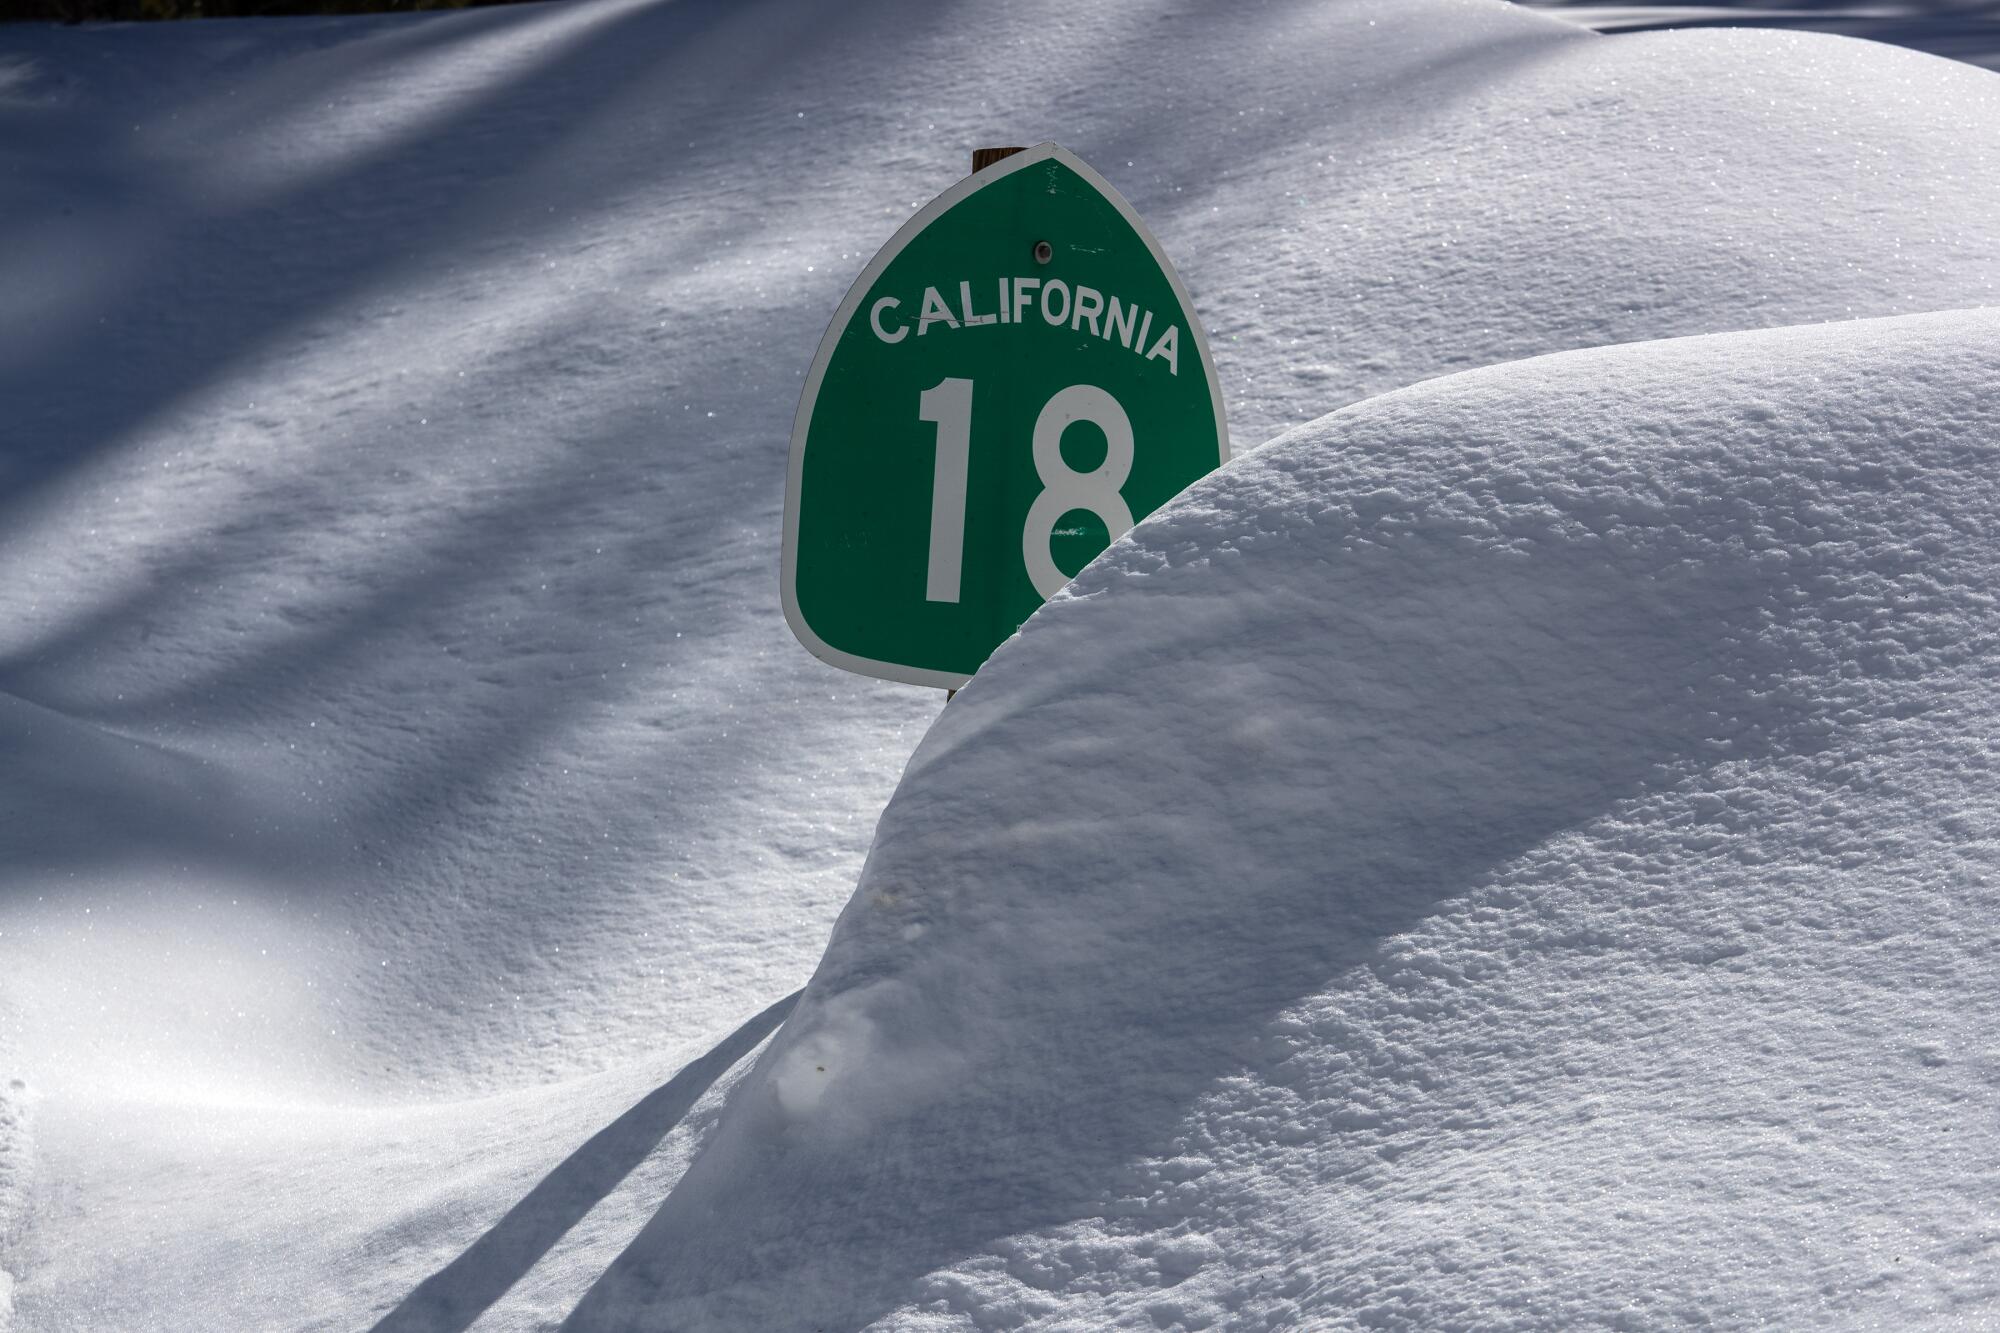 A signs that says "California 18" is poking out of a large, soft pile of snow.